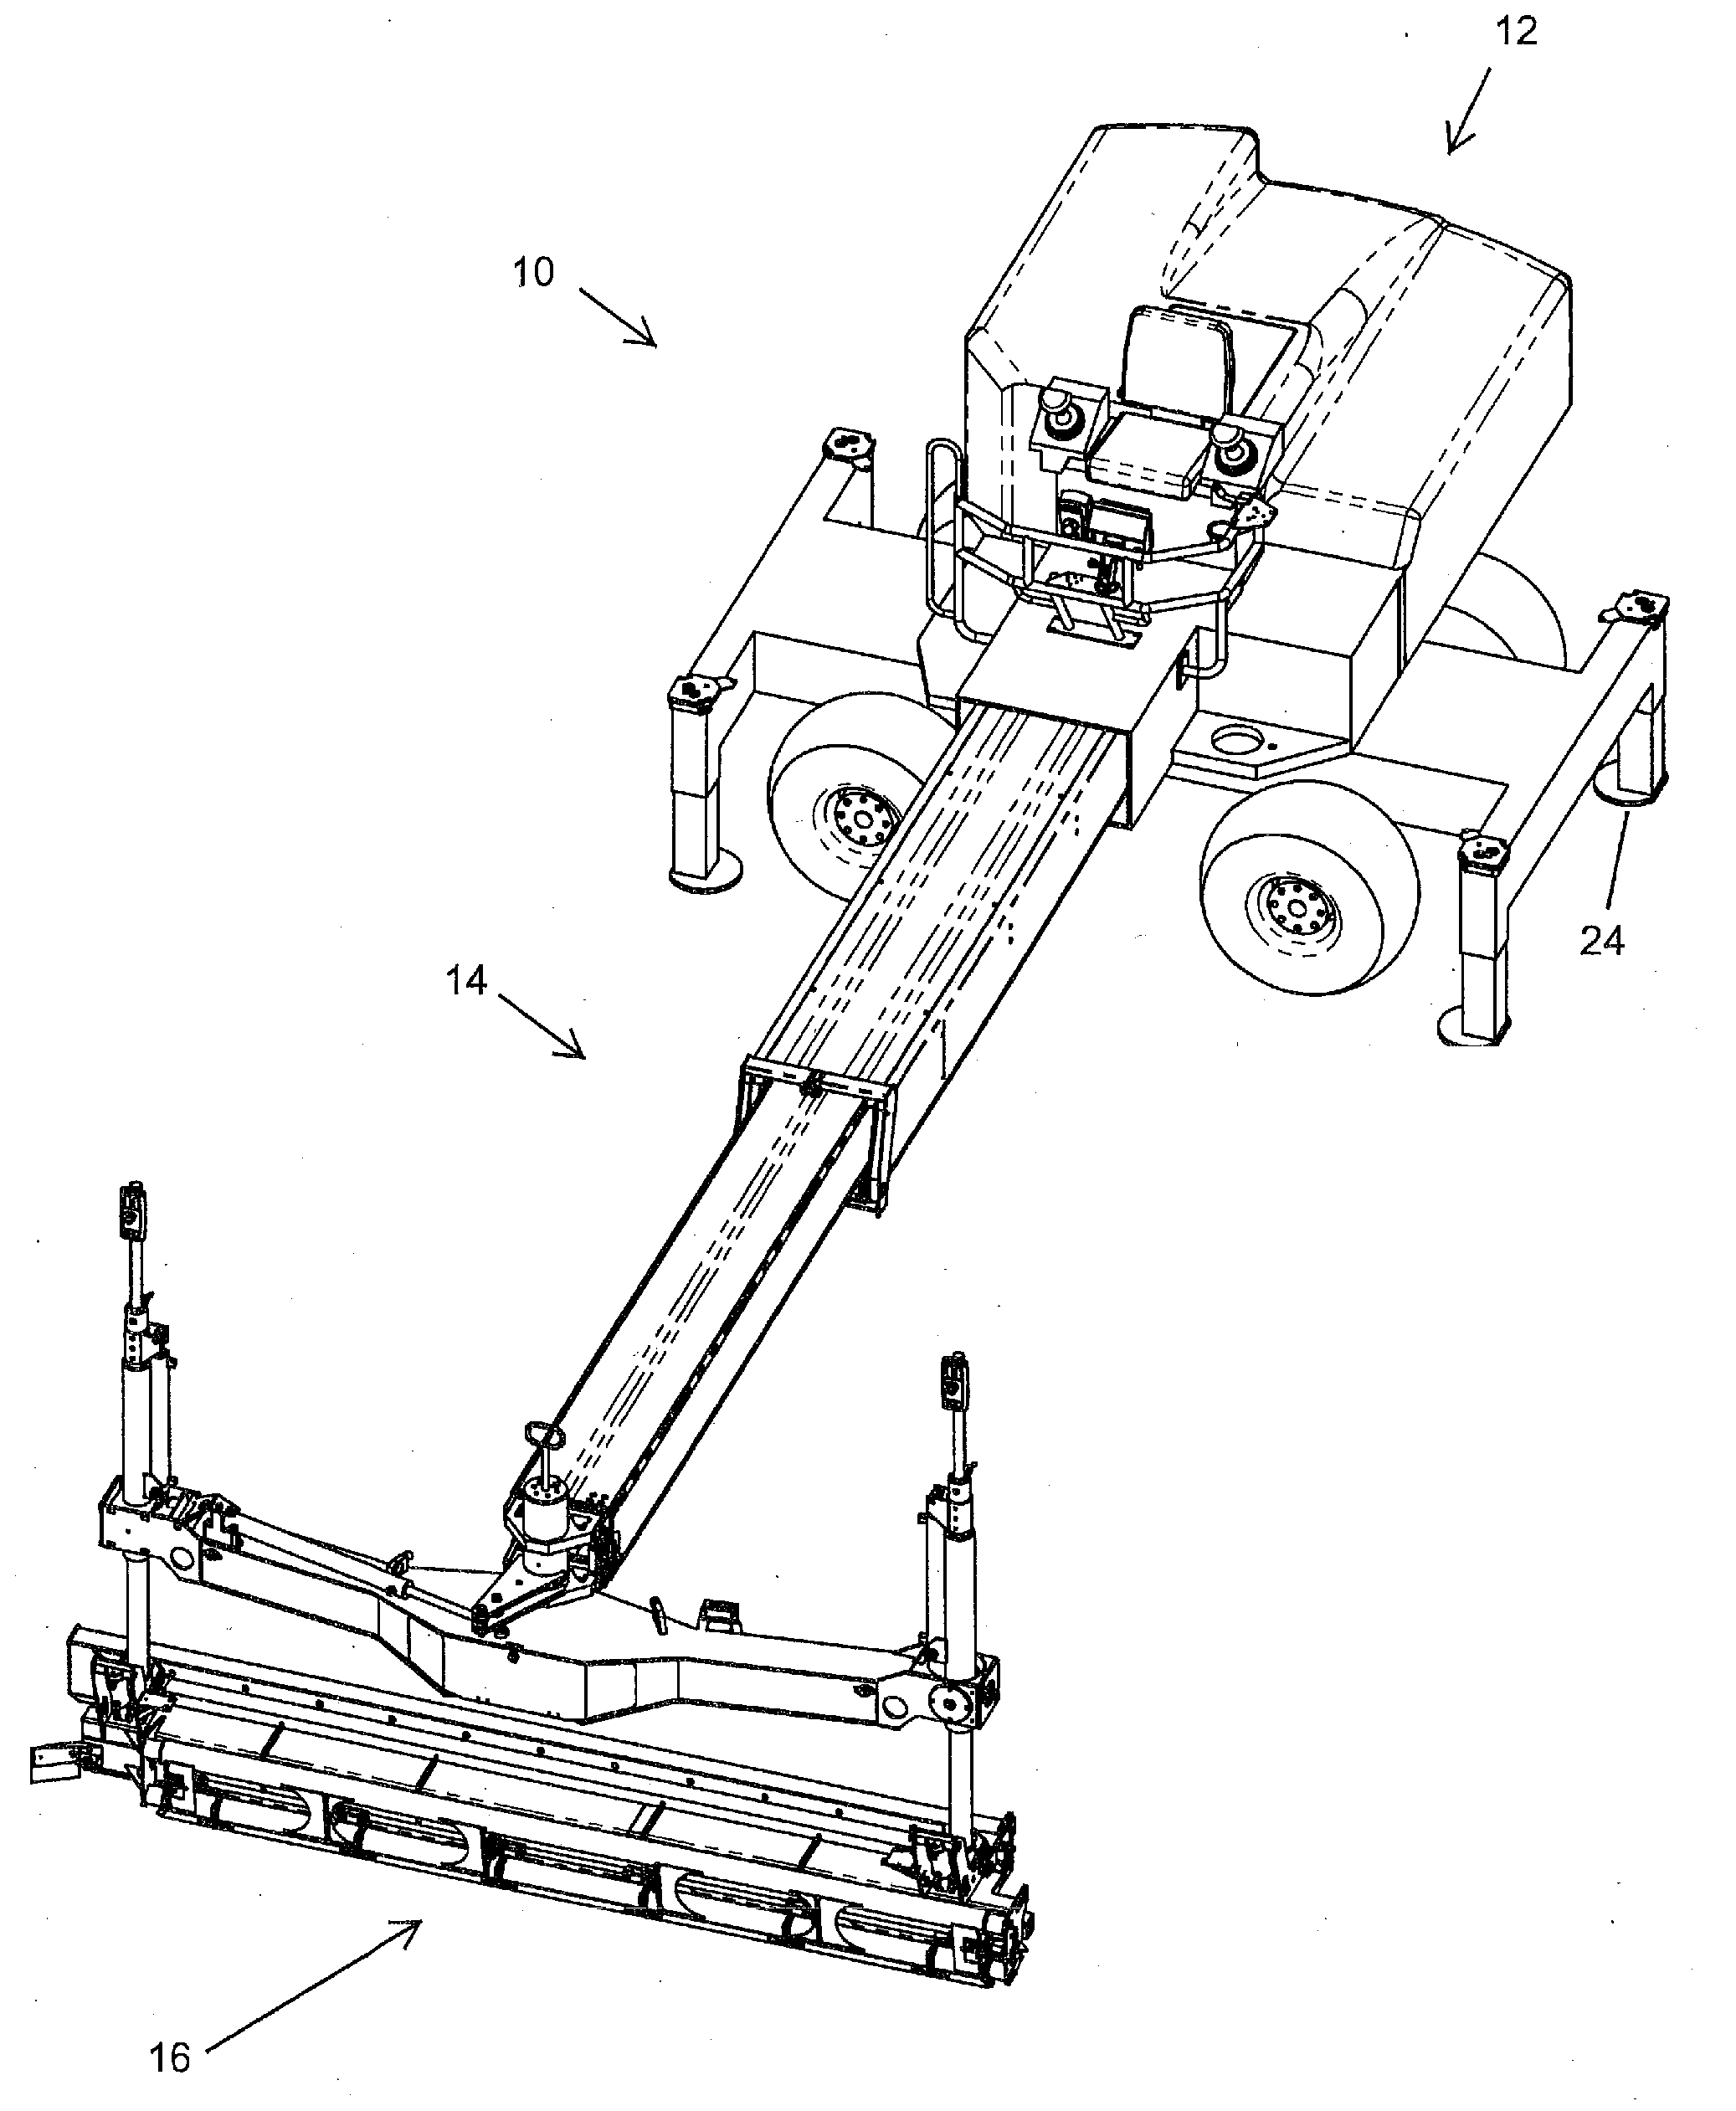 Apparatus and method for improving the control of a concrete screeding machine